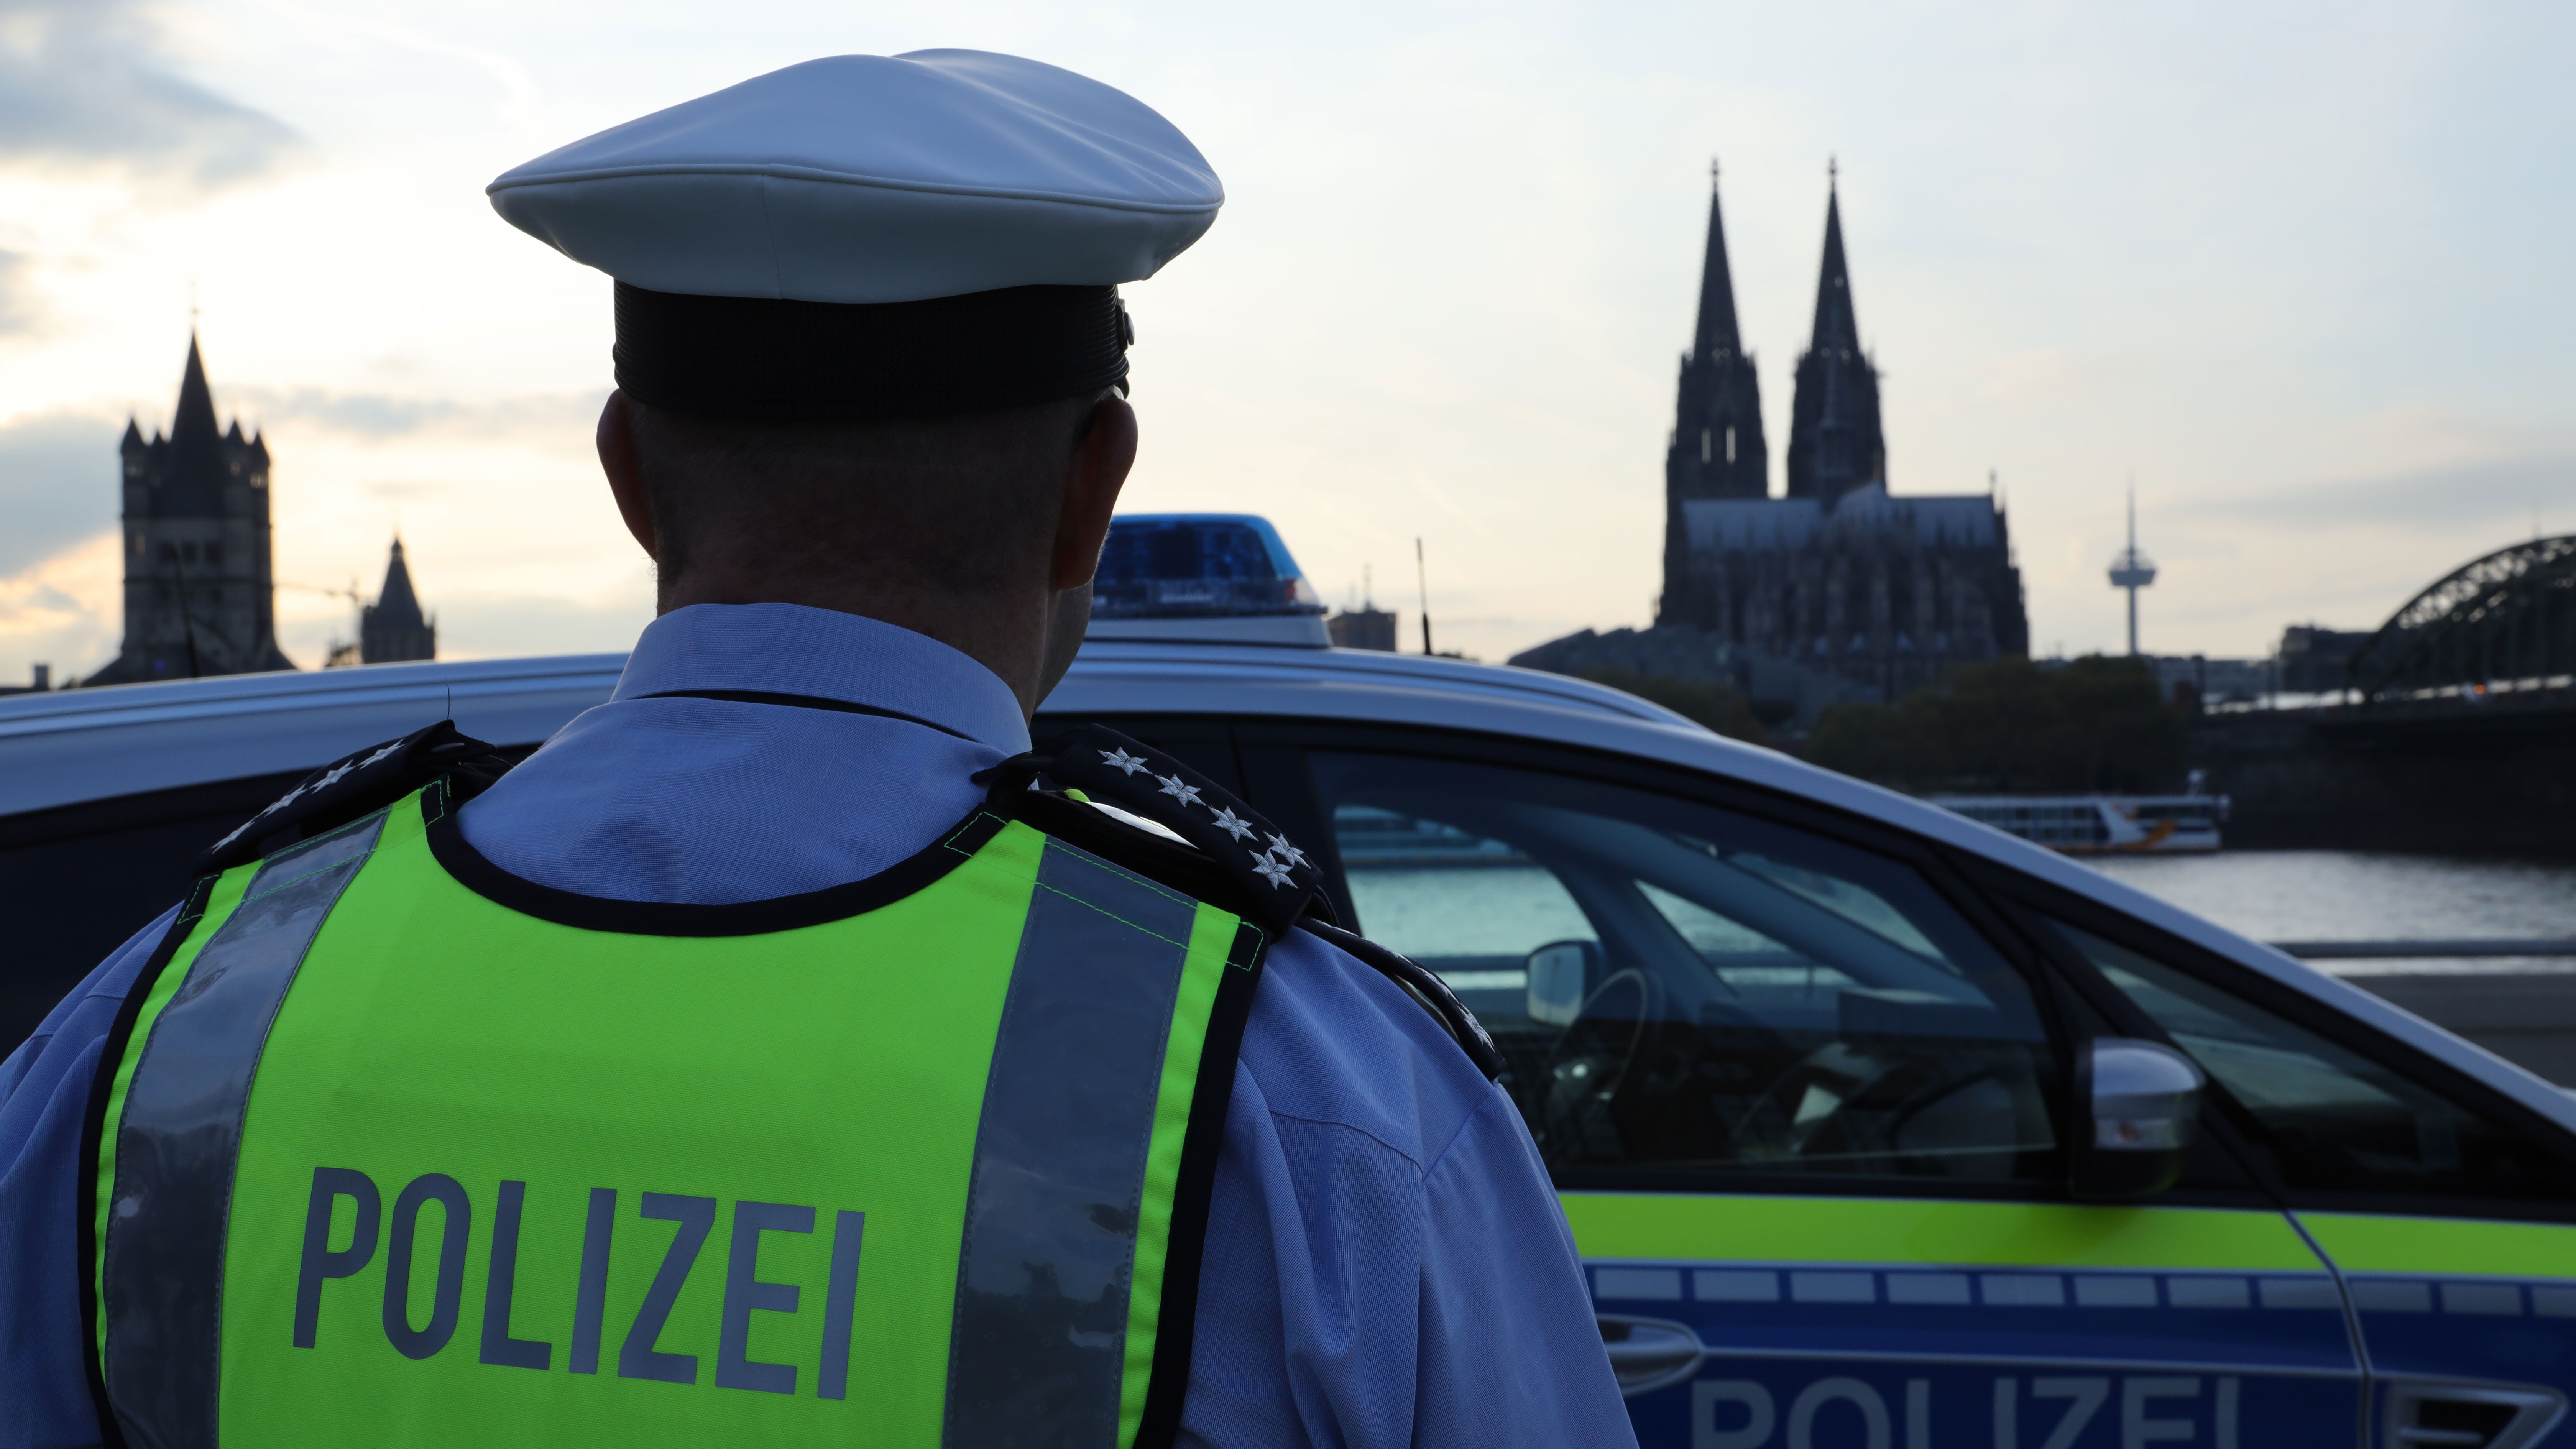 Police officer in front of patrol car in Cologne